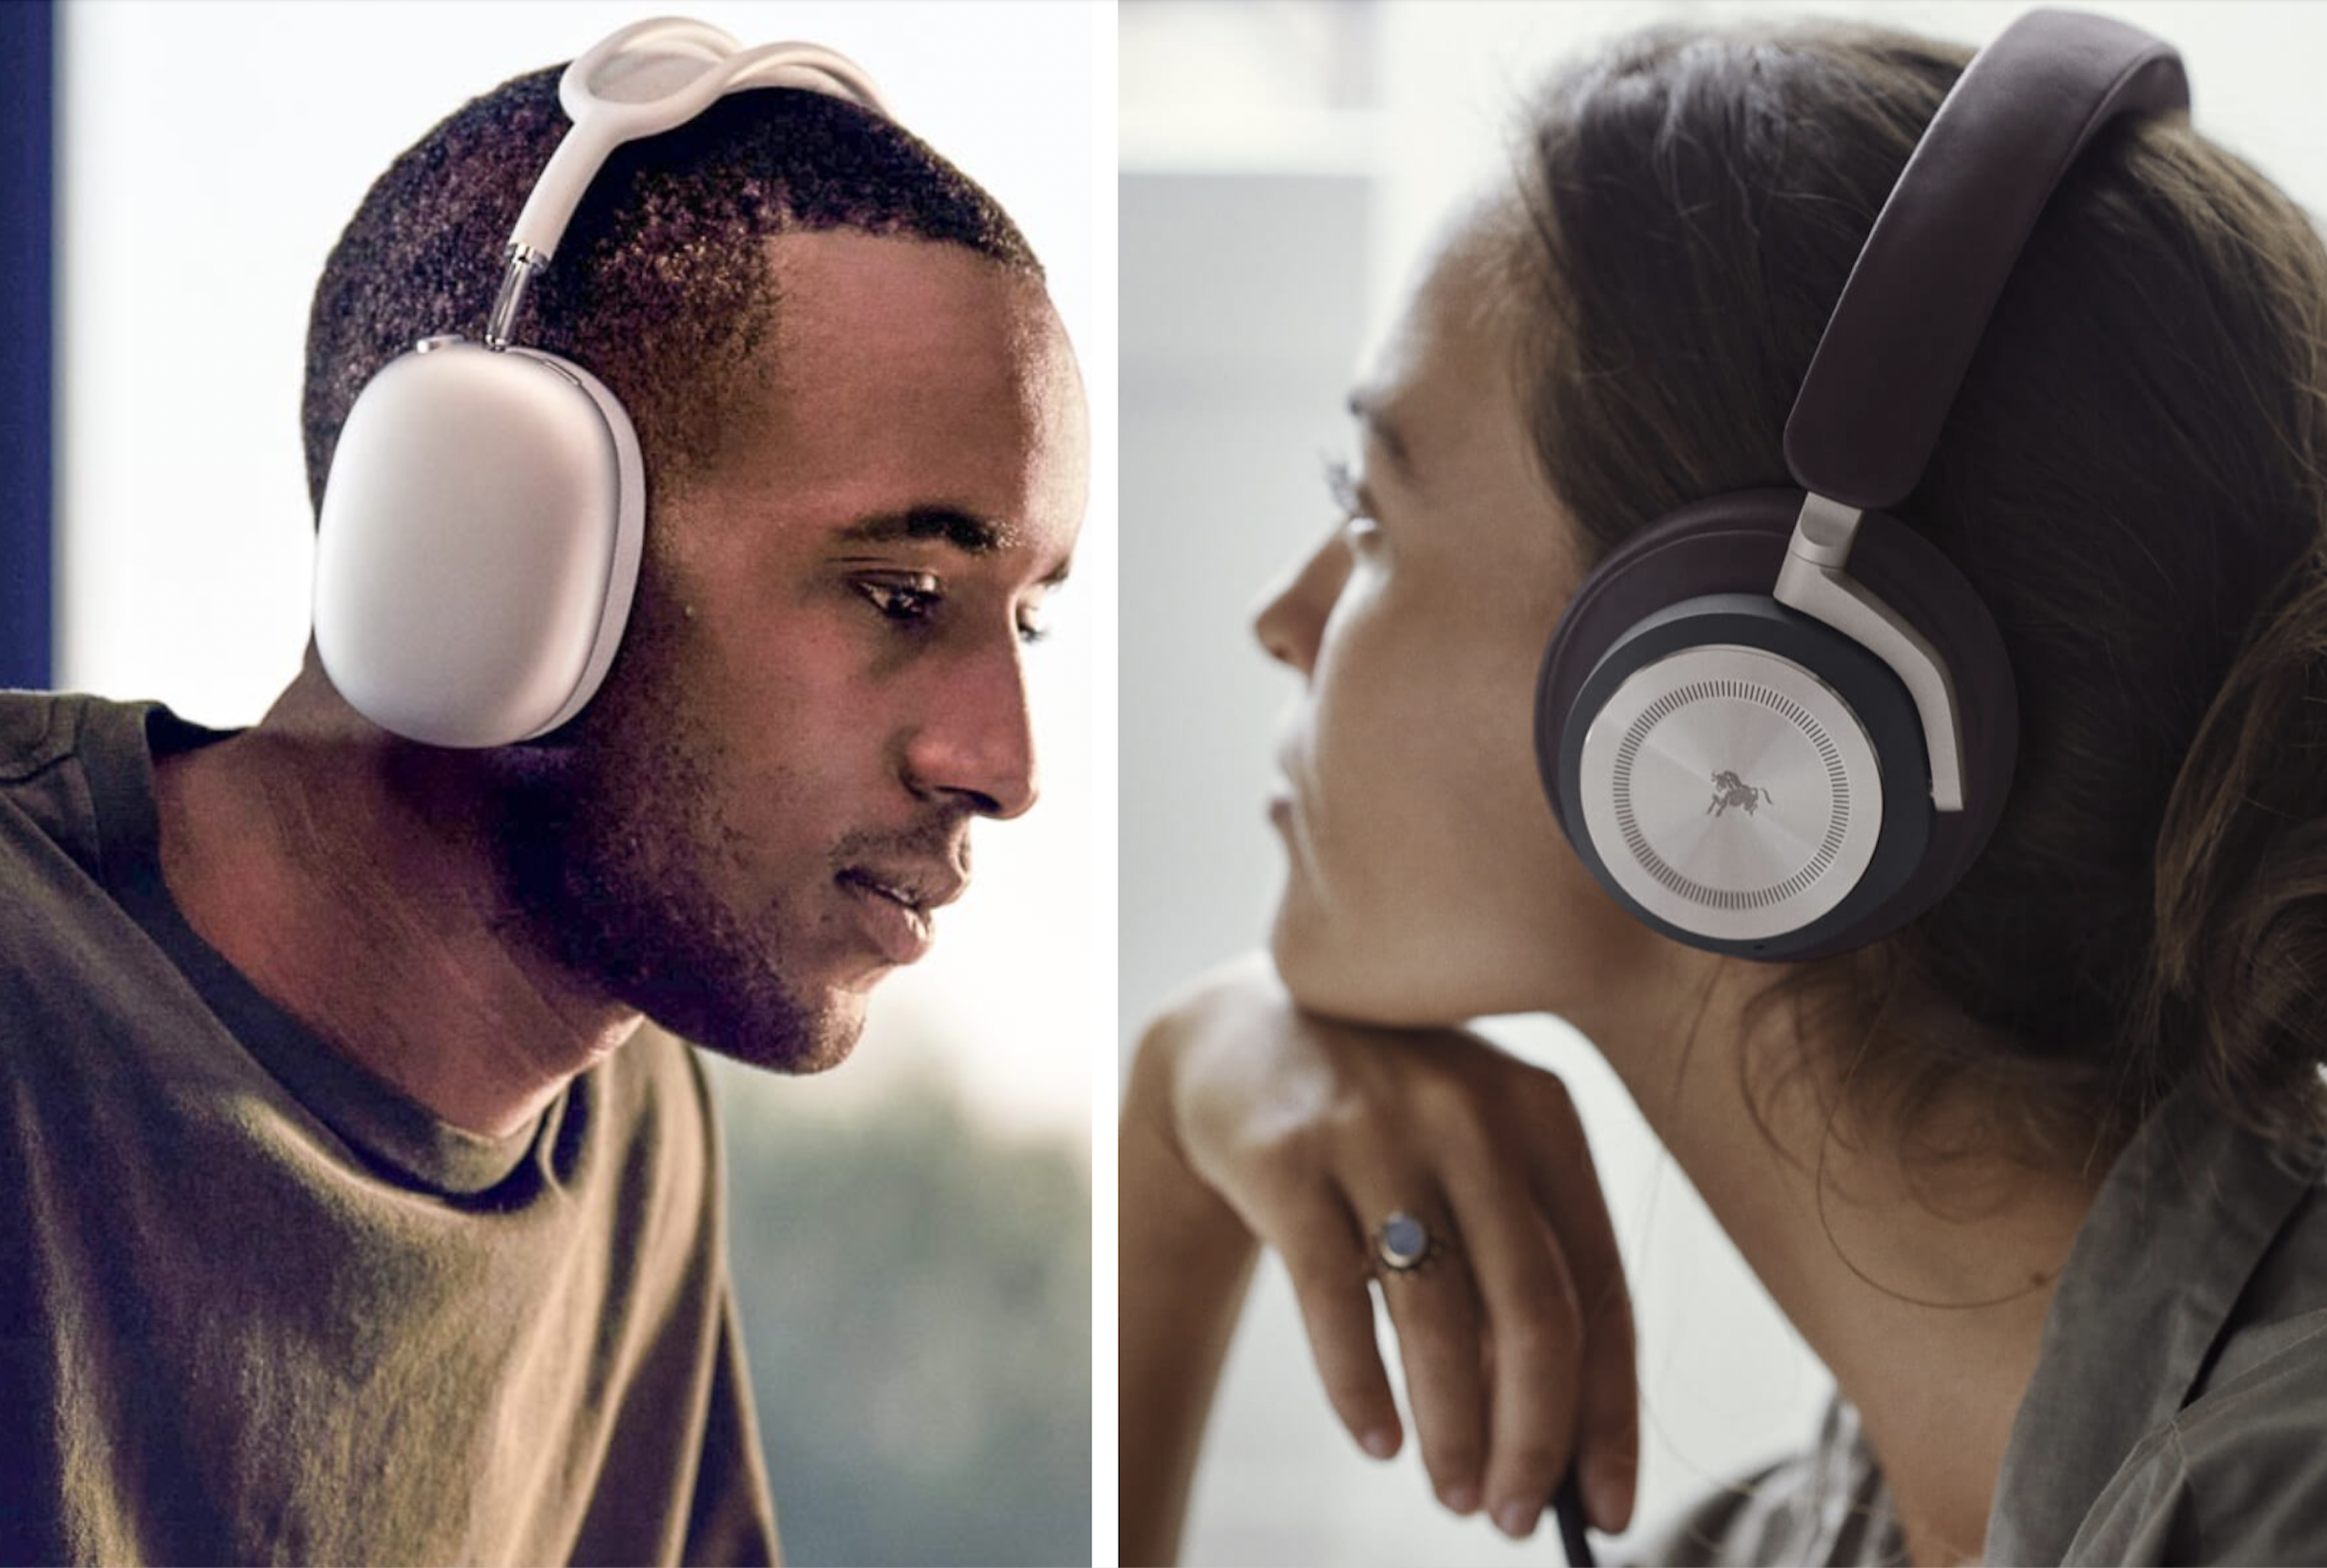 Bang & Olufsen's Beoplay vs Apple's Airpods Max: we tried both headphones, so which came out on top for sound quality, battery life, comfort and connectivity? China Morning